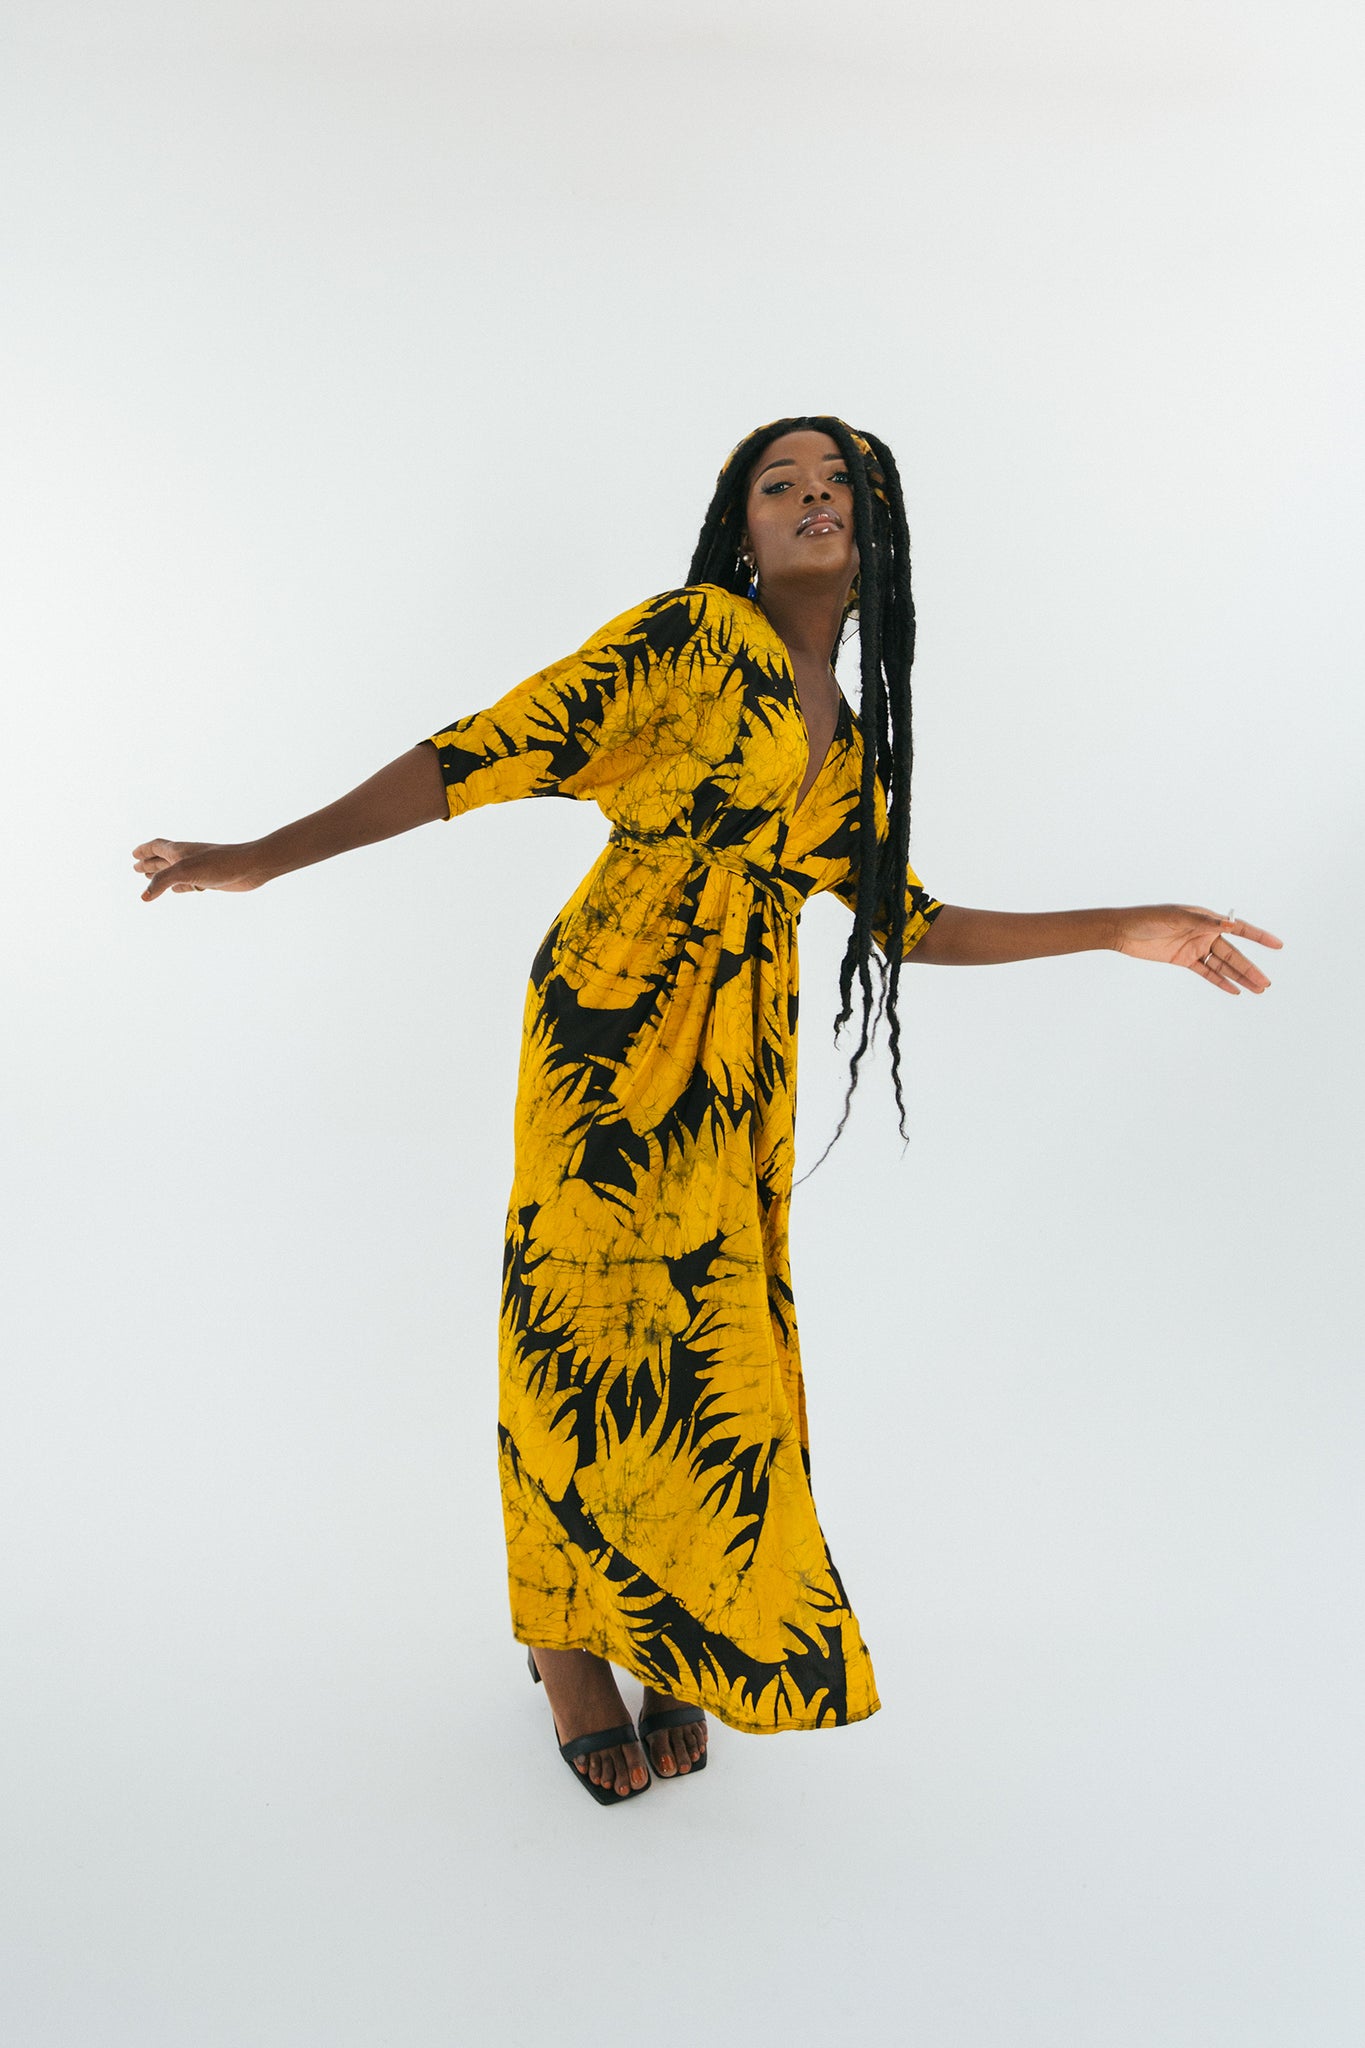 Vibrant yellow dress with black palm patterns captures Veso Golden’s dynamic pose, contrasting with a light backdrop.